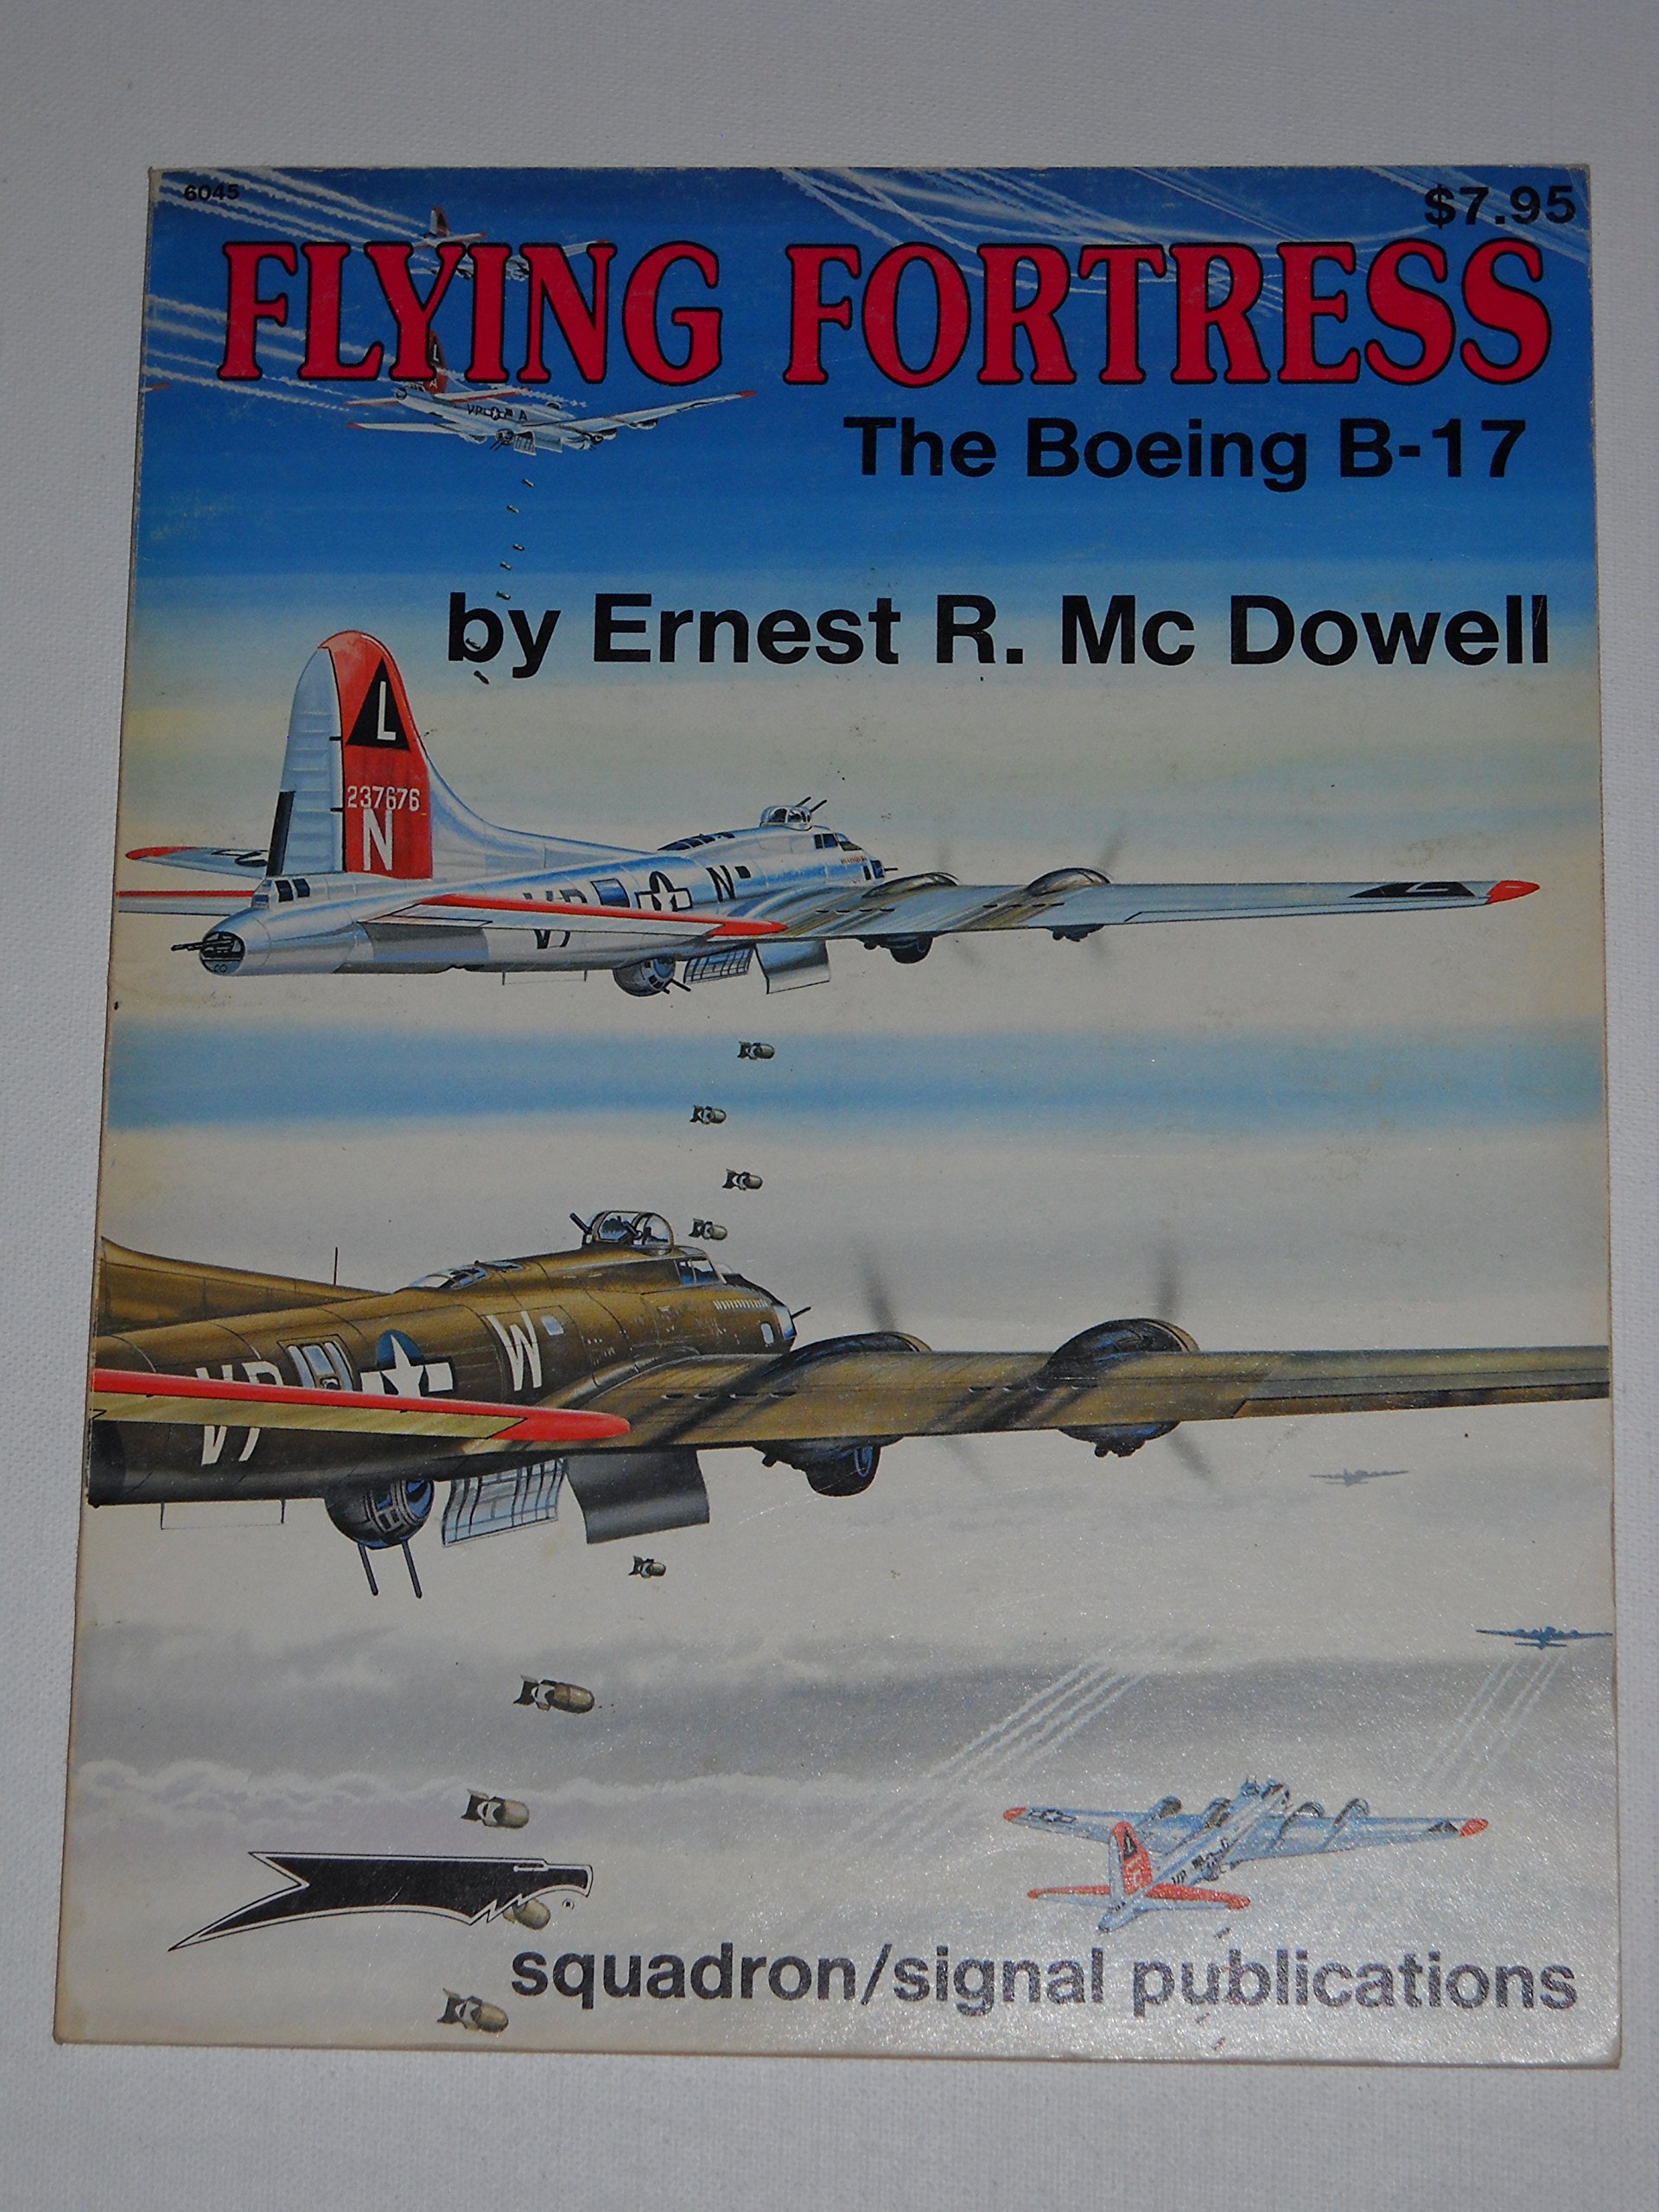 Flying Fortress, the Boeing B-17